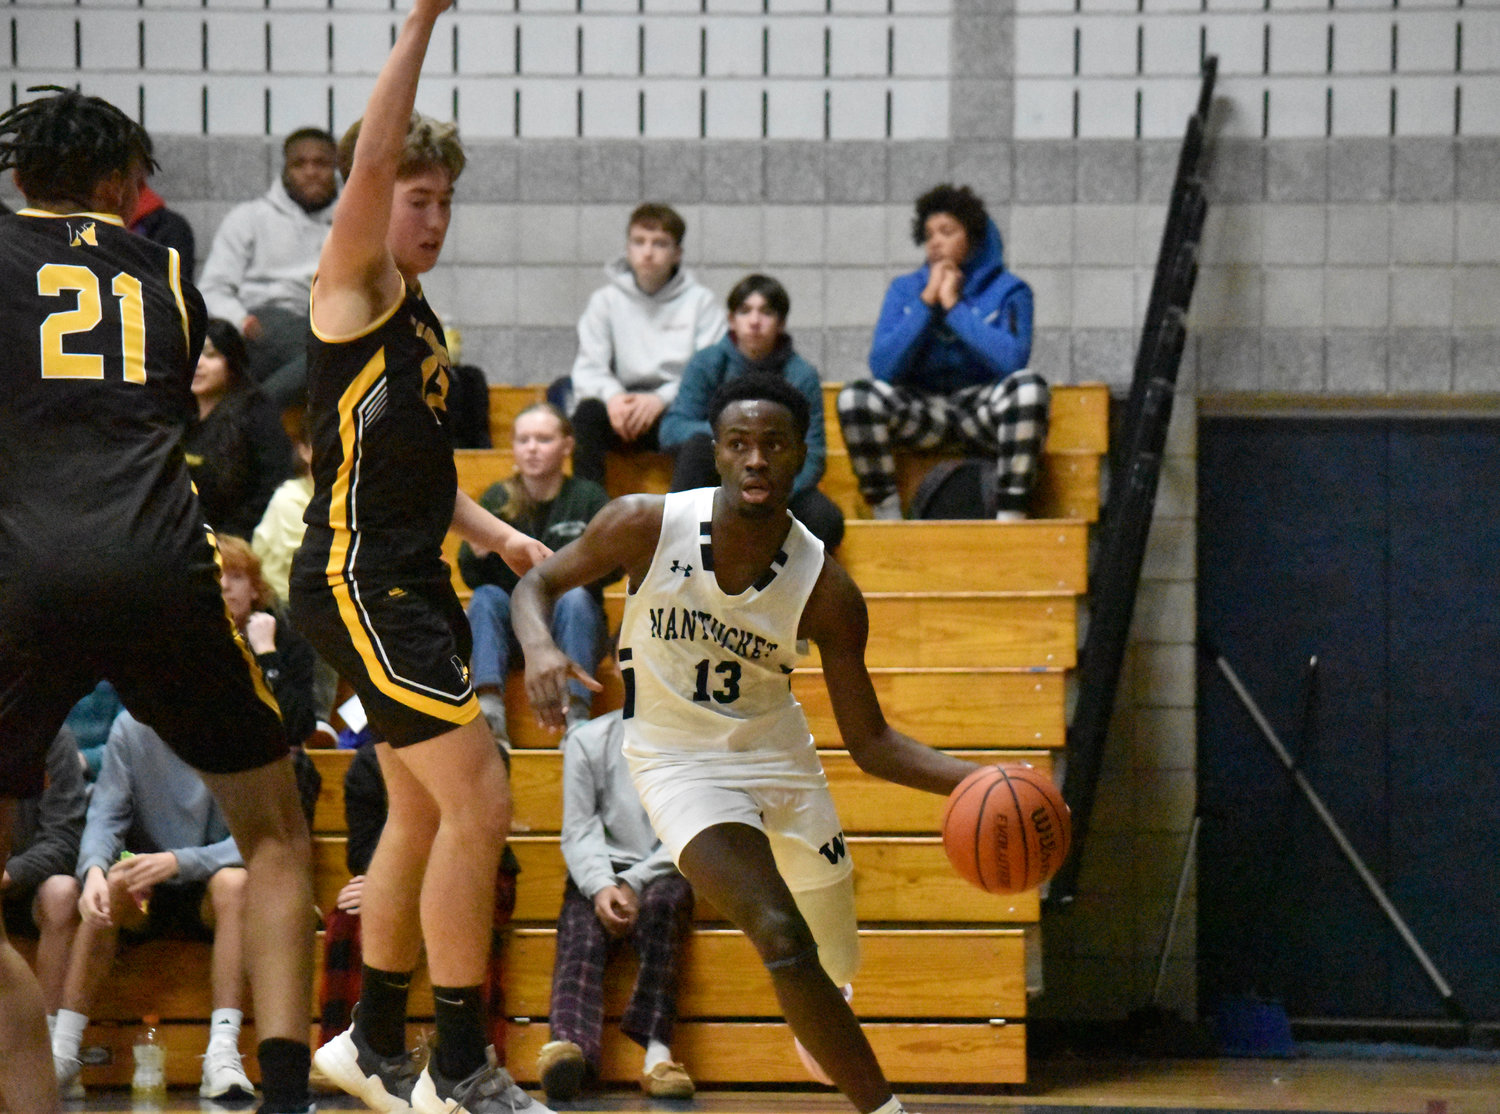 Jayquan Francis dribbles along the baseline during last Thursday’s game against Nauset.